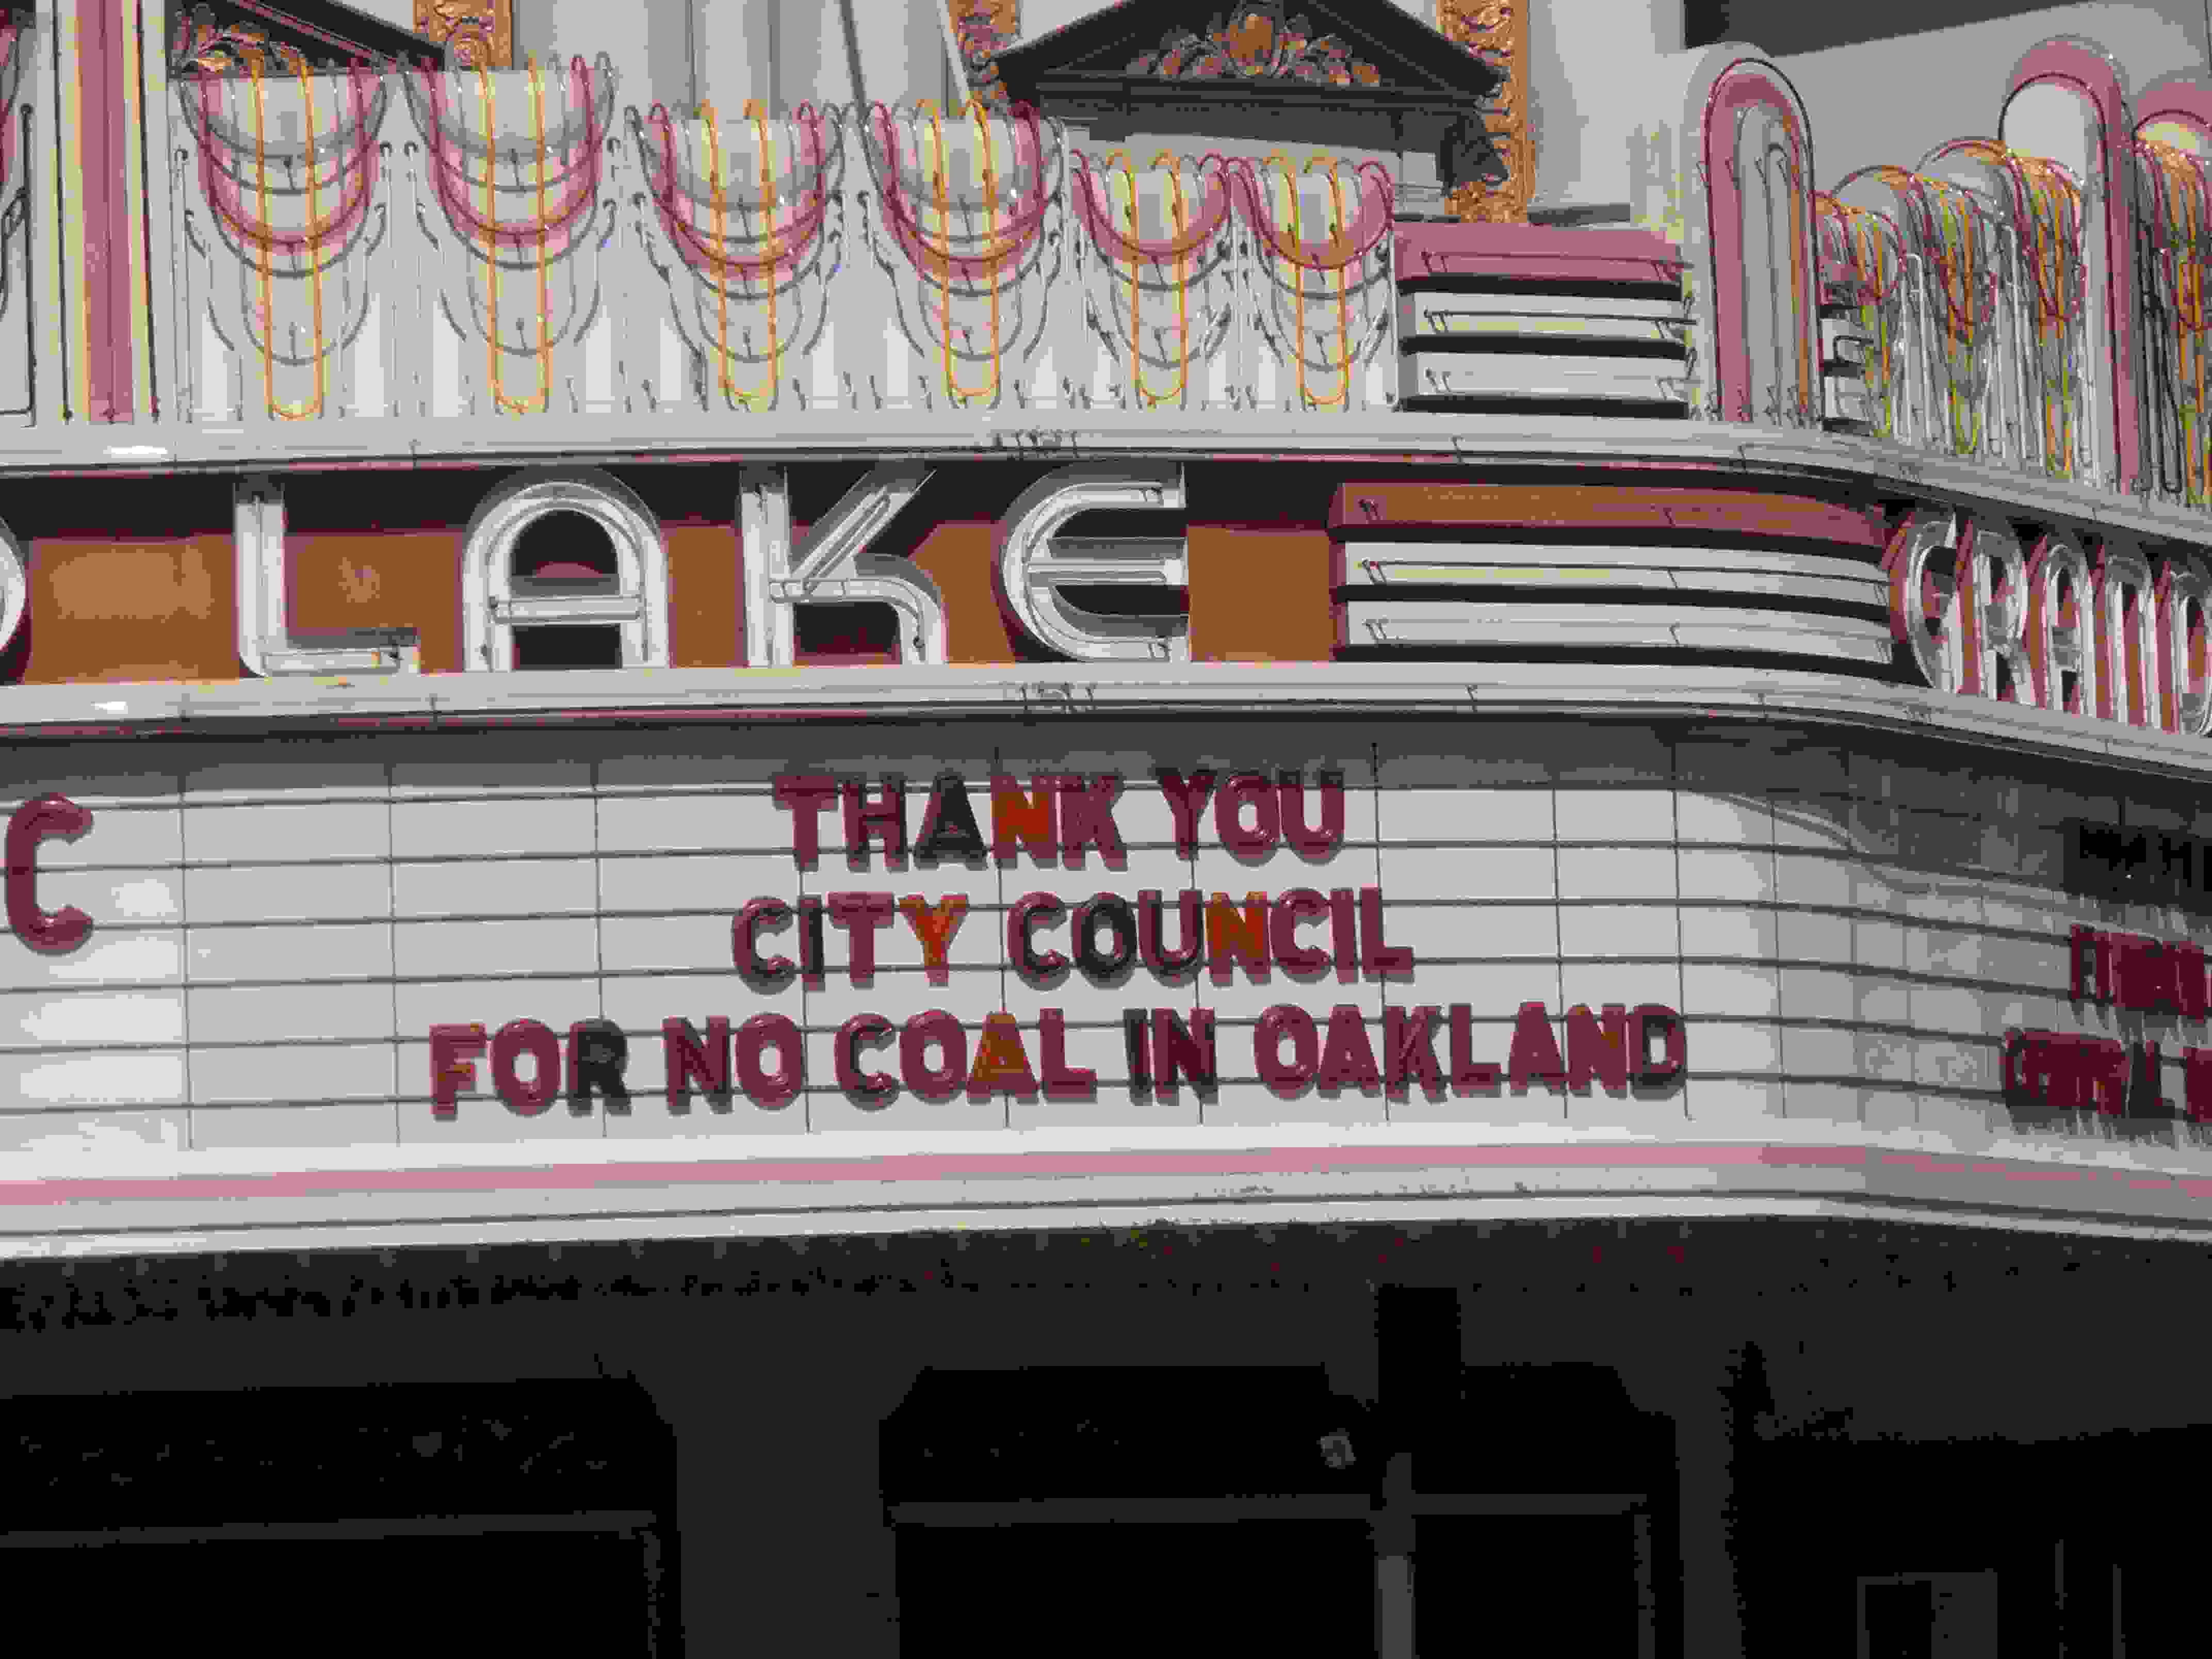 Grand Lake Theater marquee displaying thanks to City Council for voting to ban coal Credit: Jahahara